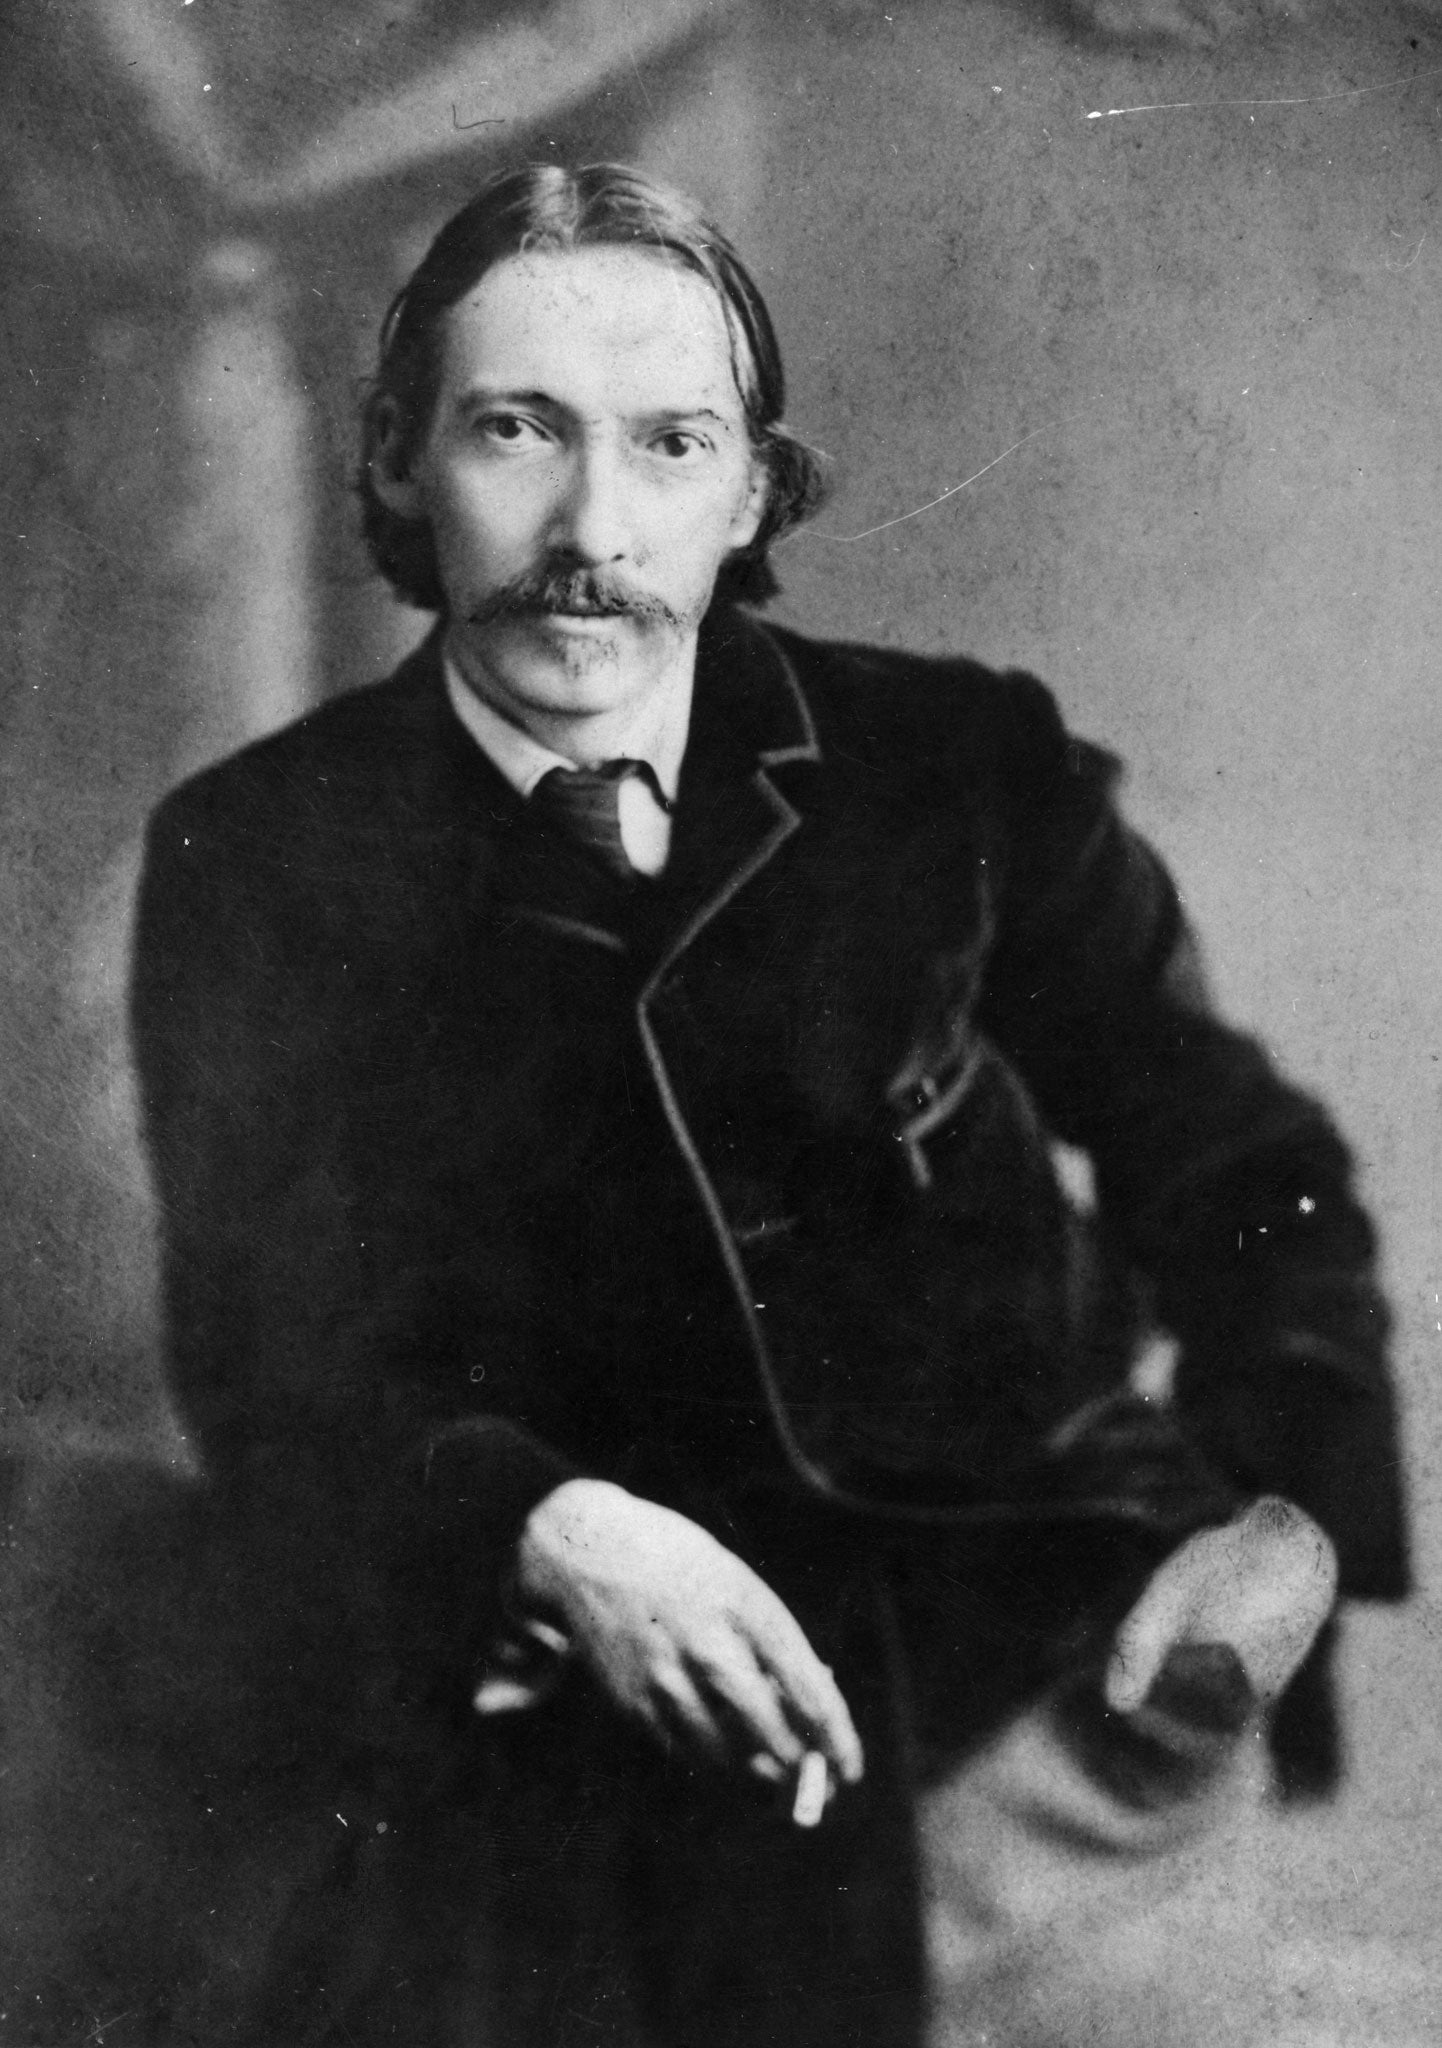 Robert Louis Stevenson was a master of so many different styles of writing